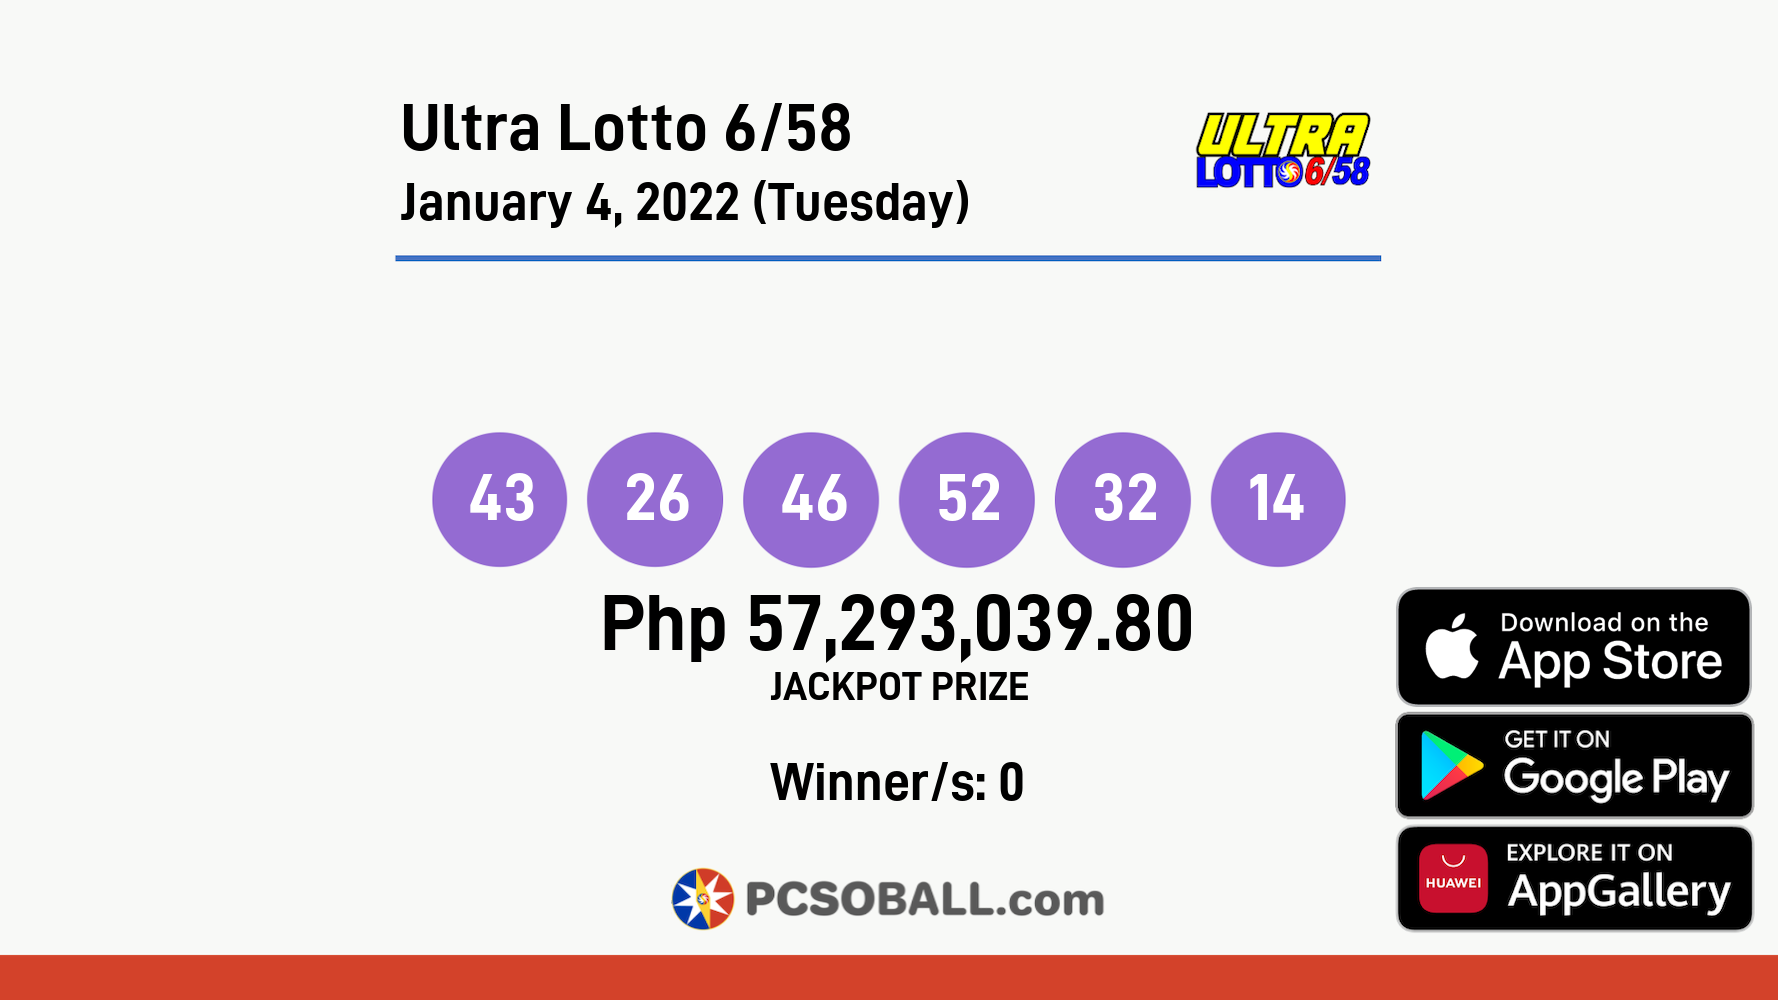 Ultra Lotto 6/58 January 4, 2022 (Tuesday) Result